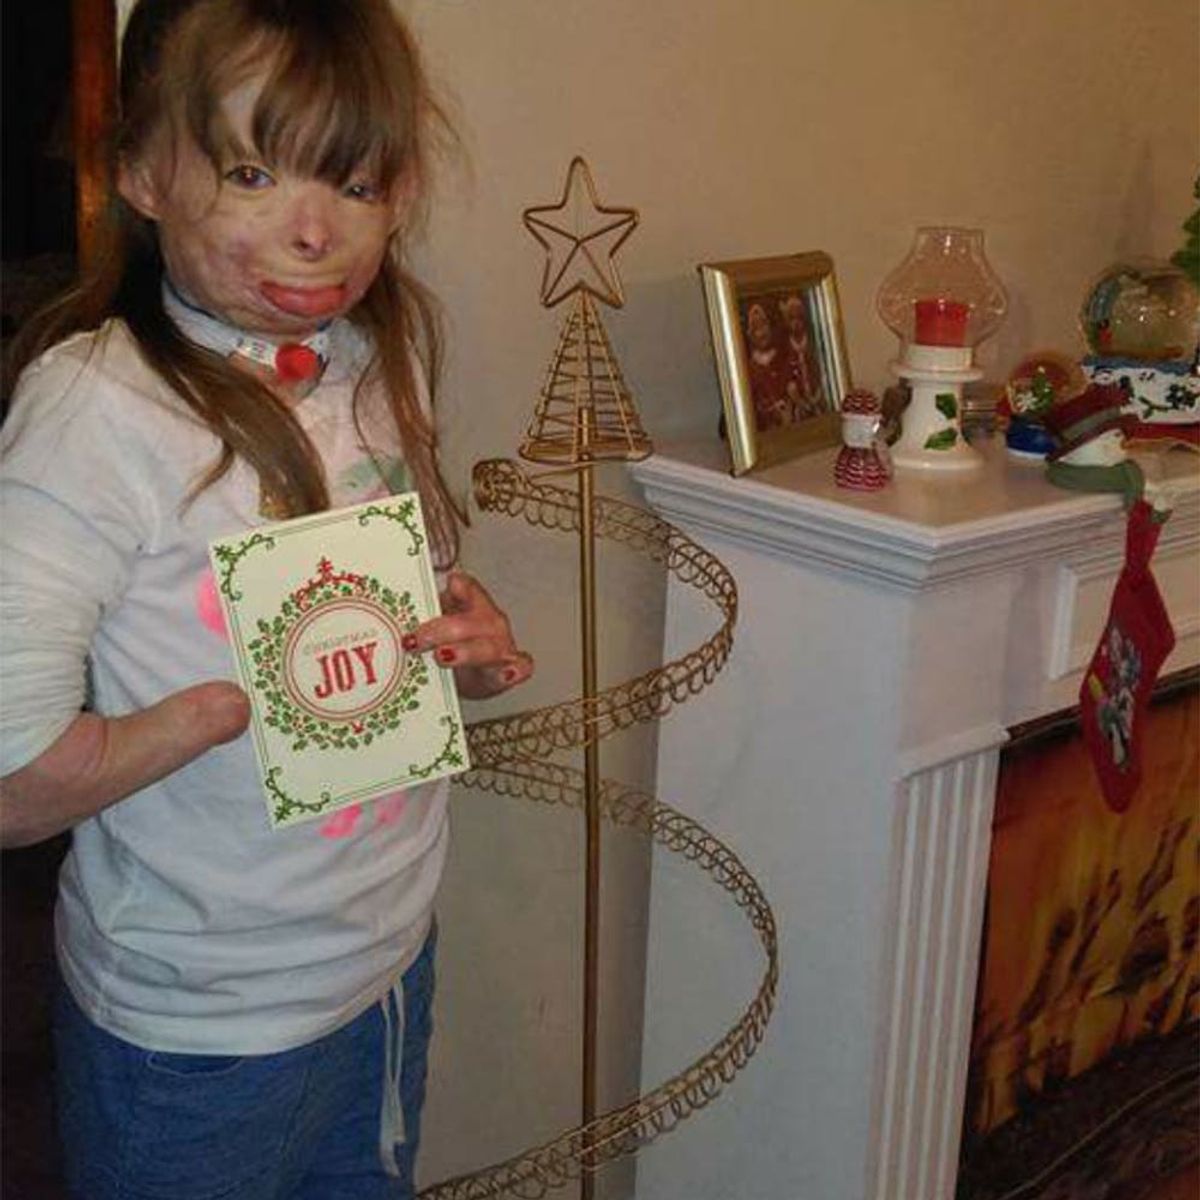 Why You Should Add This Little Girl to Your List of Holiday Card Recipients